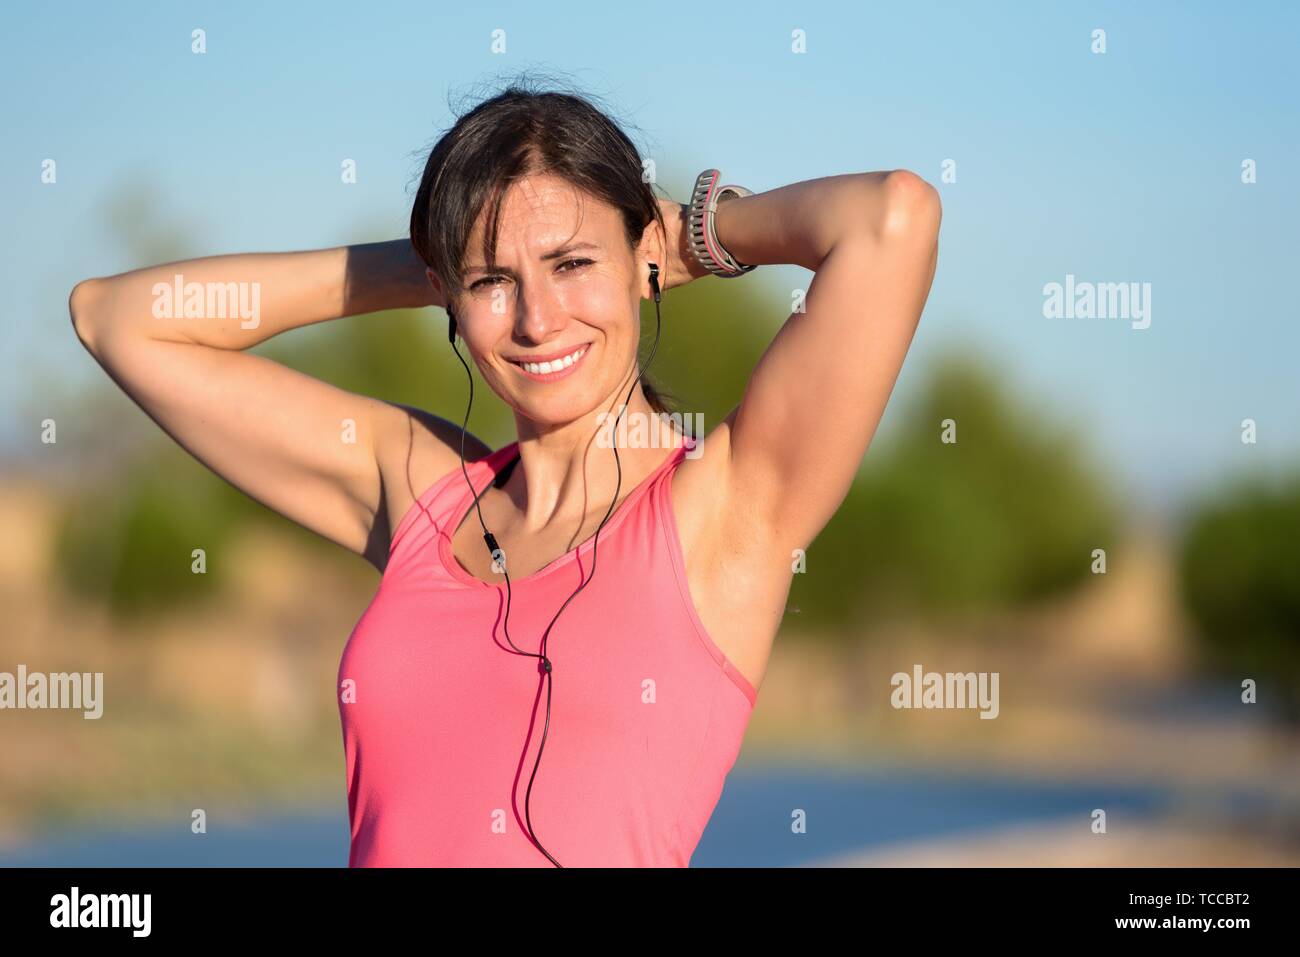 Attractive young woman in sports clothing smiling. Fitness model. Stock Photo